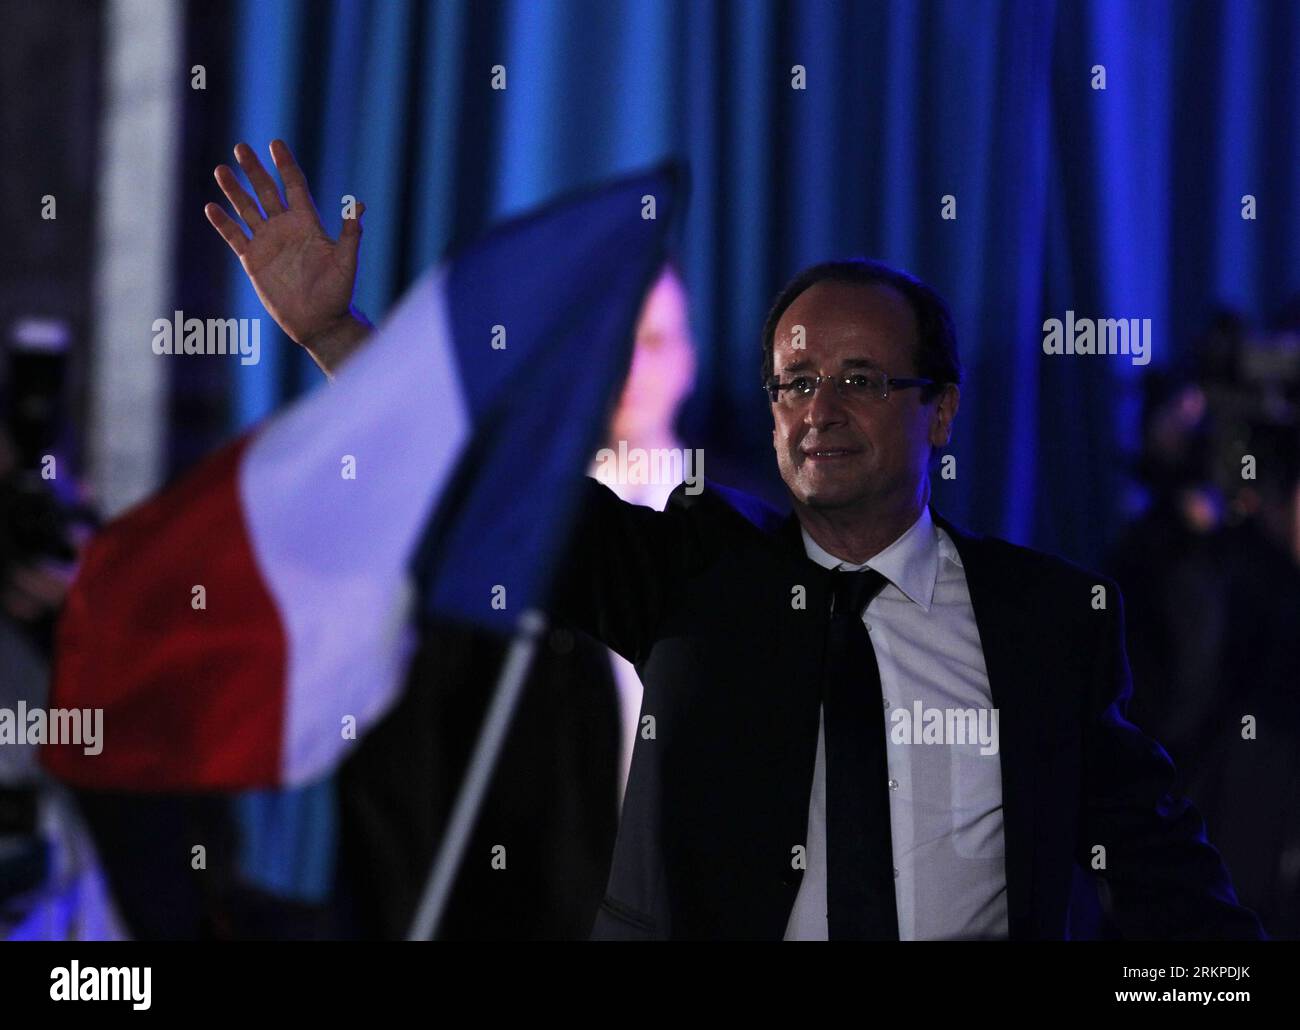 Bildnummer: 57962363  Datum: 06.05.2012  Copyright: imago/Xinhua (120506) -- TULLE, May 6, 2012 (Xinhua) -- France s Socialist Party s candidate Francois Hollande gestures to his supporters during a rally after he defeated incumbent French President Nicolas Sarkozy in Sunday s decisive presidential runoff, in Tulle, southern France, May 6, 2012. Francois Hollande said he feels proud of bringing hope to France and that change will start from now in an address to his supporters on Sunday night after the presidential election. (Xinhua/Gao Jing) (zx) FRANCE-TULLE-HOLLANDE-VICTORY PUBLICATIONxNOTxI Stock Photo